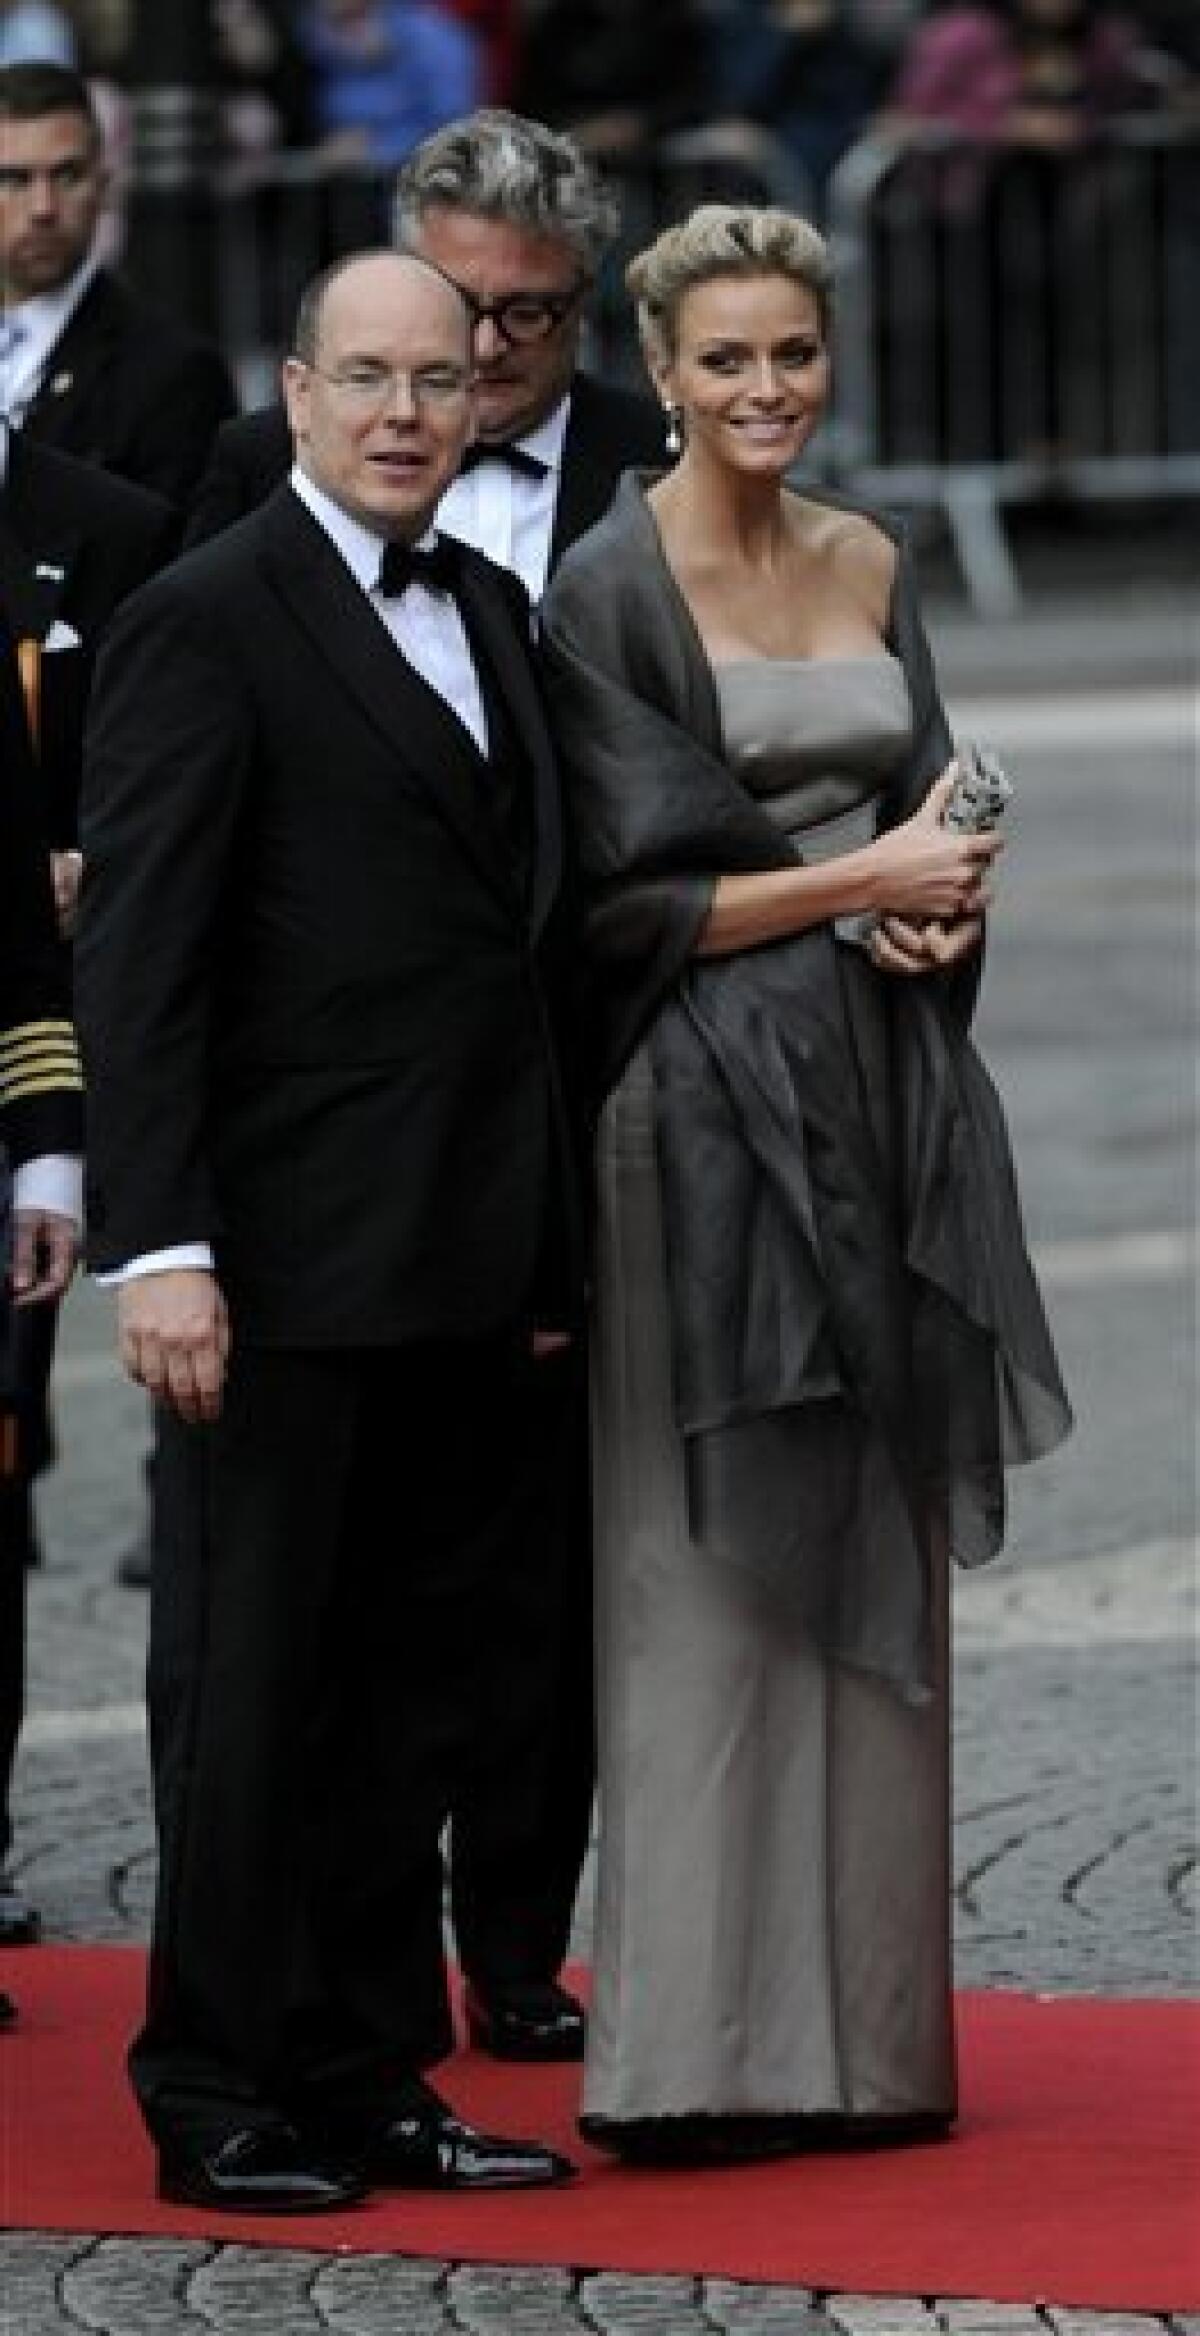 Prince Albert of Monaco and Charlene Wittstock, arrive at the Swedish Parliament's concert at the Royal Concert Hall in Stockholm, Sweden, Friday June 18, 2010. Crown Princess Victoria will marry Daniel Westling on Saturday, June 19. (AP Photo/Scanpix, Maja Suslin)